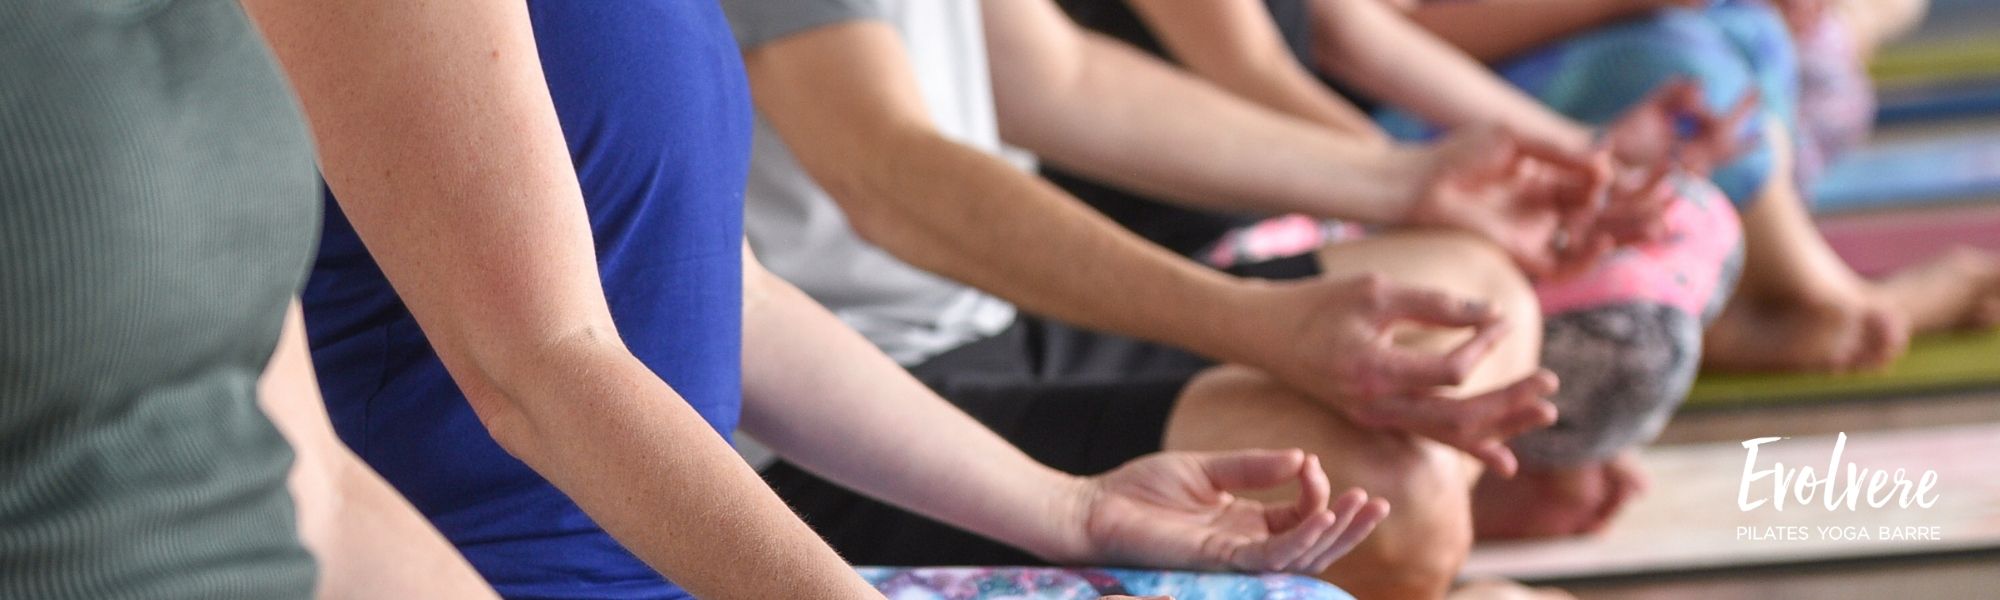 Yoga for anxiety and depression at Evolvere in Lane Cove 